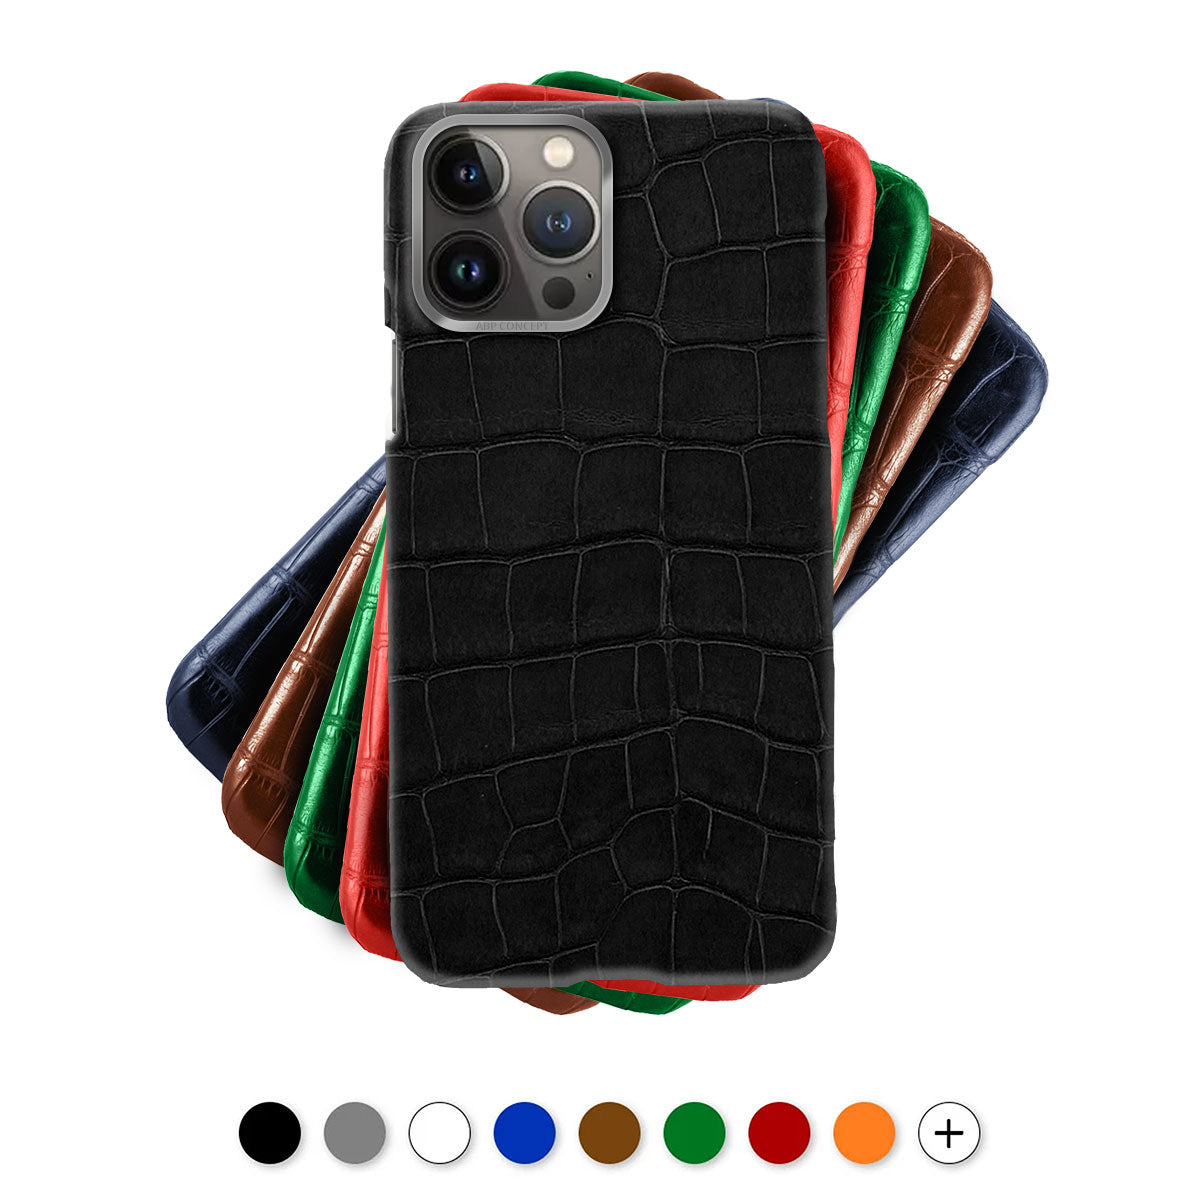 Leather iPhone HIMALAYA case / cover - iPhone 13 ( Pro / Max ) - Genuine  alligator